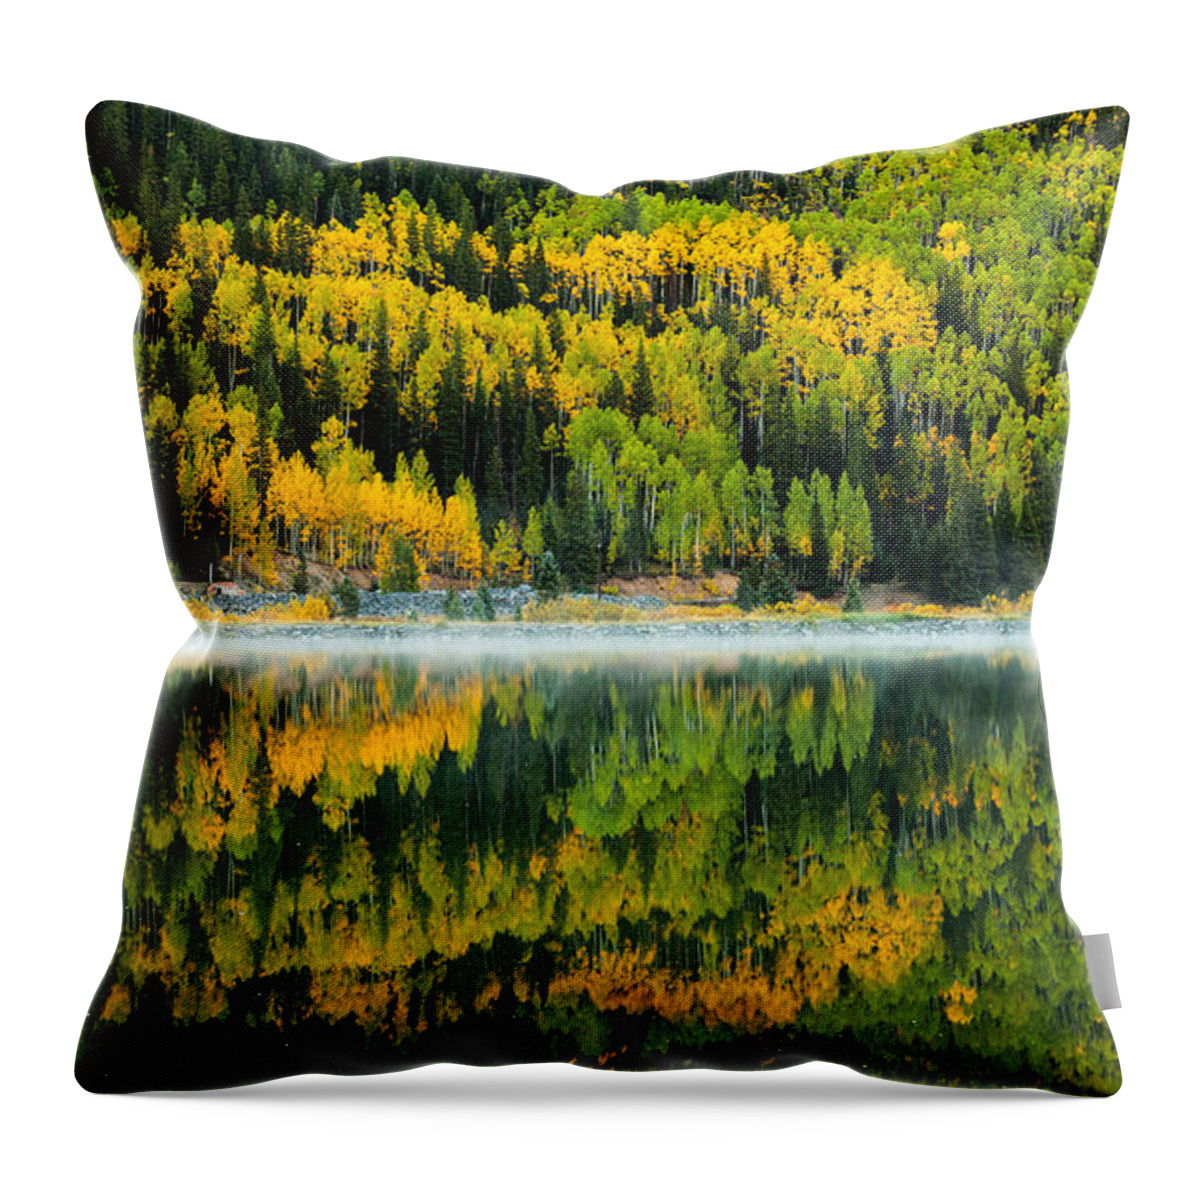 Crystal Lake Throw Pillow featuring the photograph Crystal's Colors by Darren White